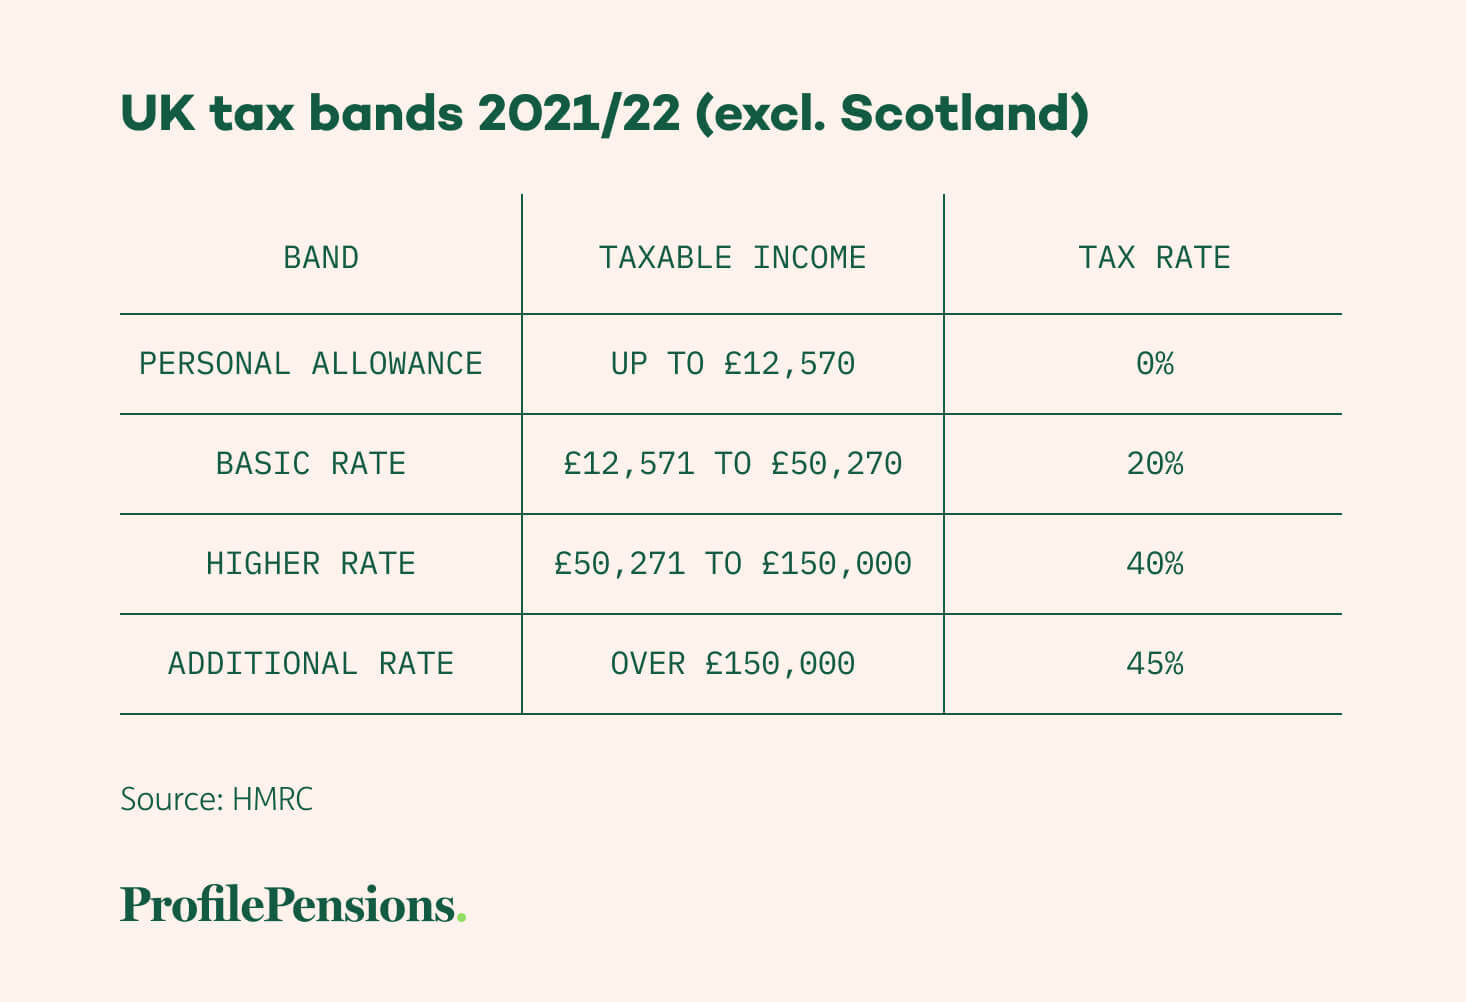 UK tax bands 2021/22 (excluding Scotland)